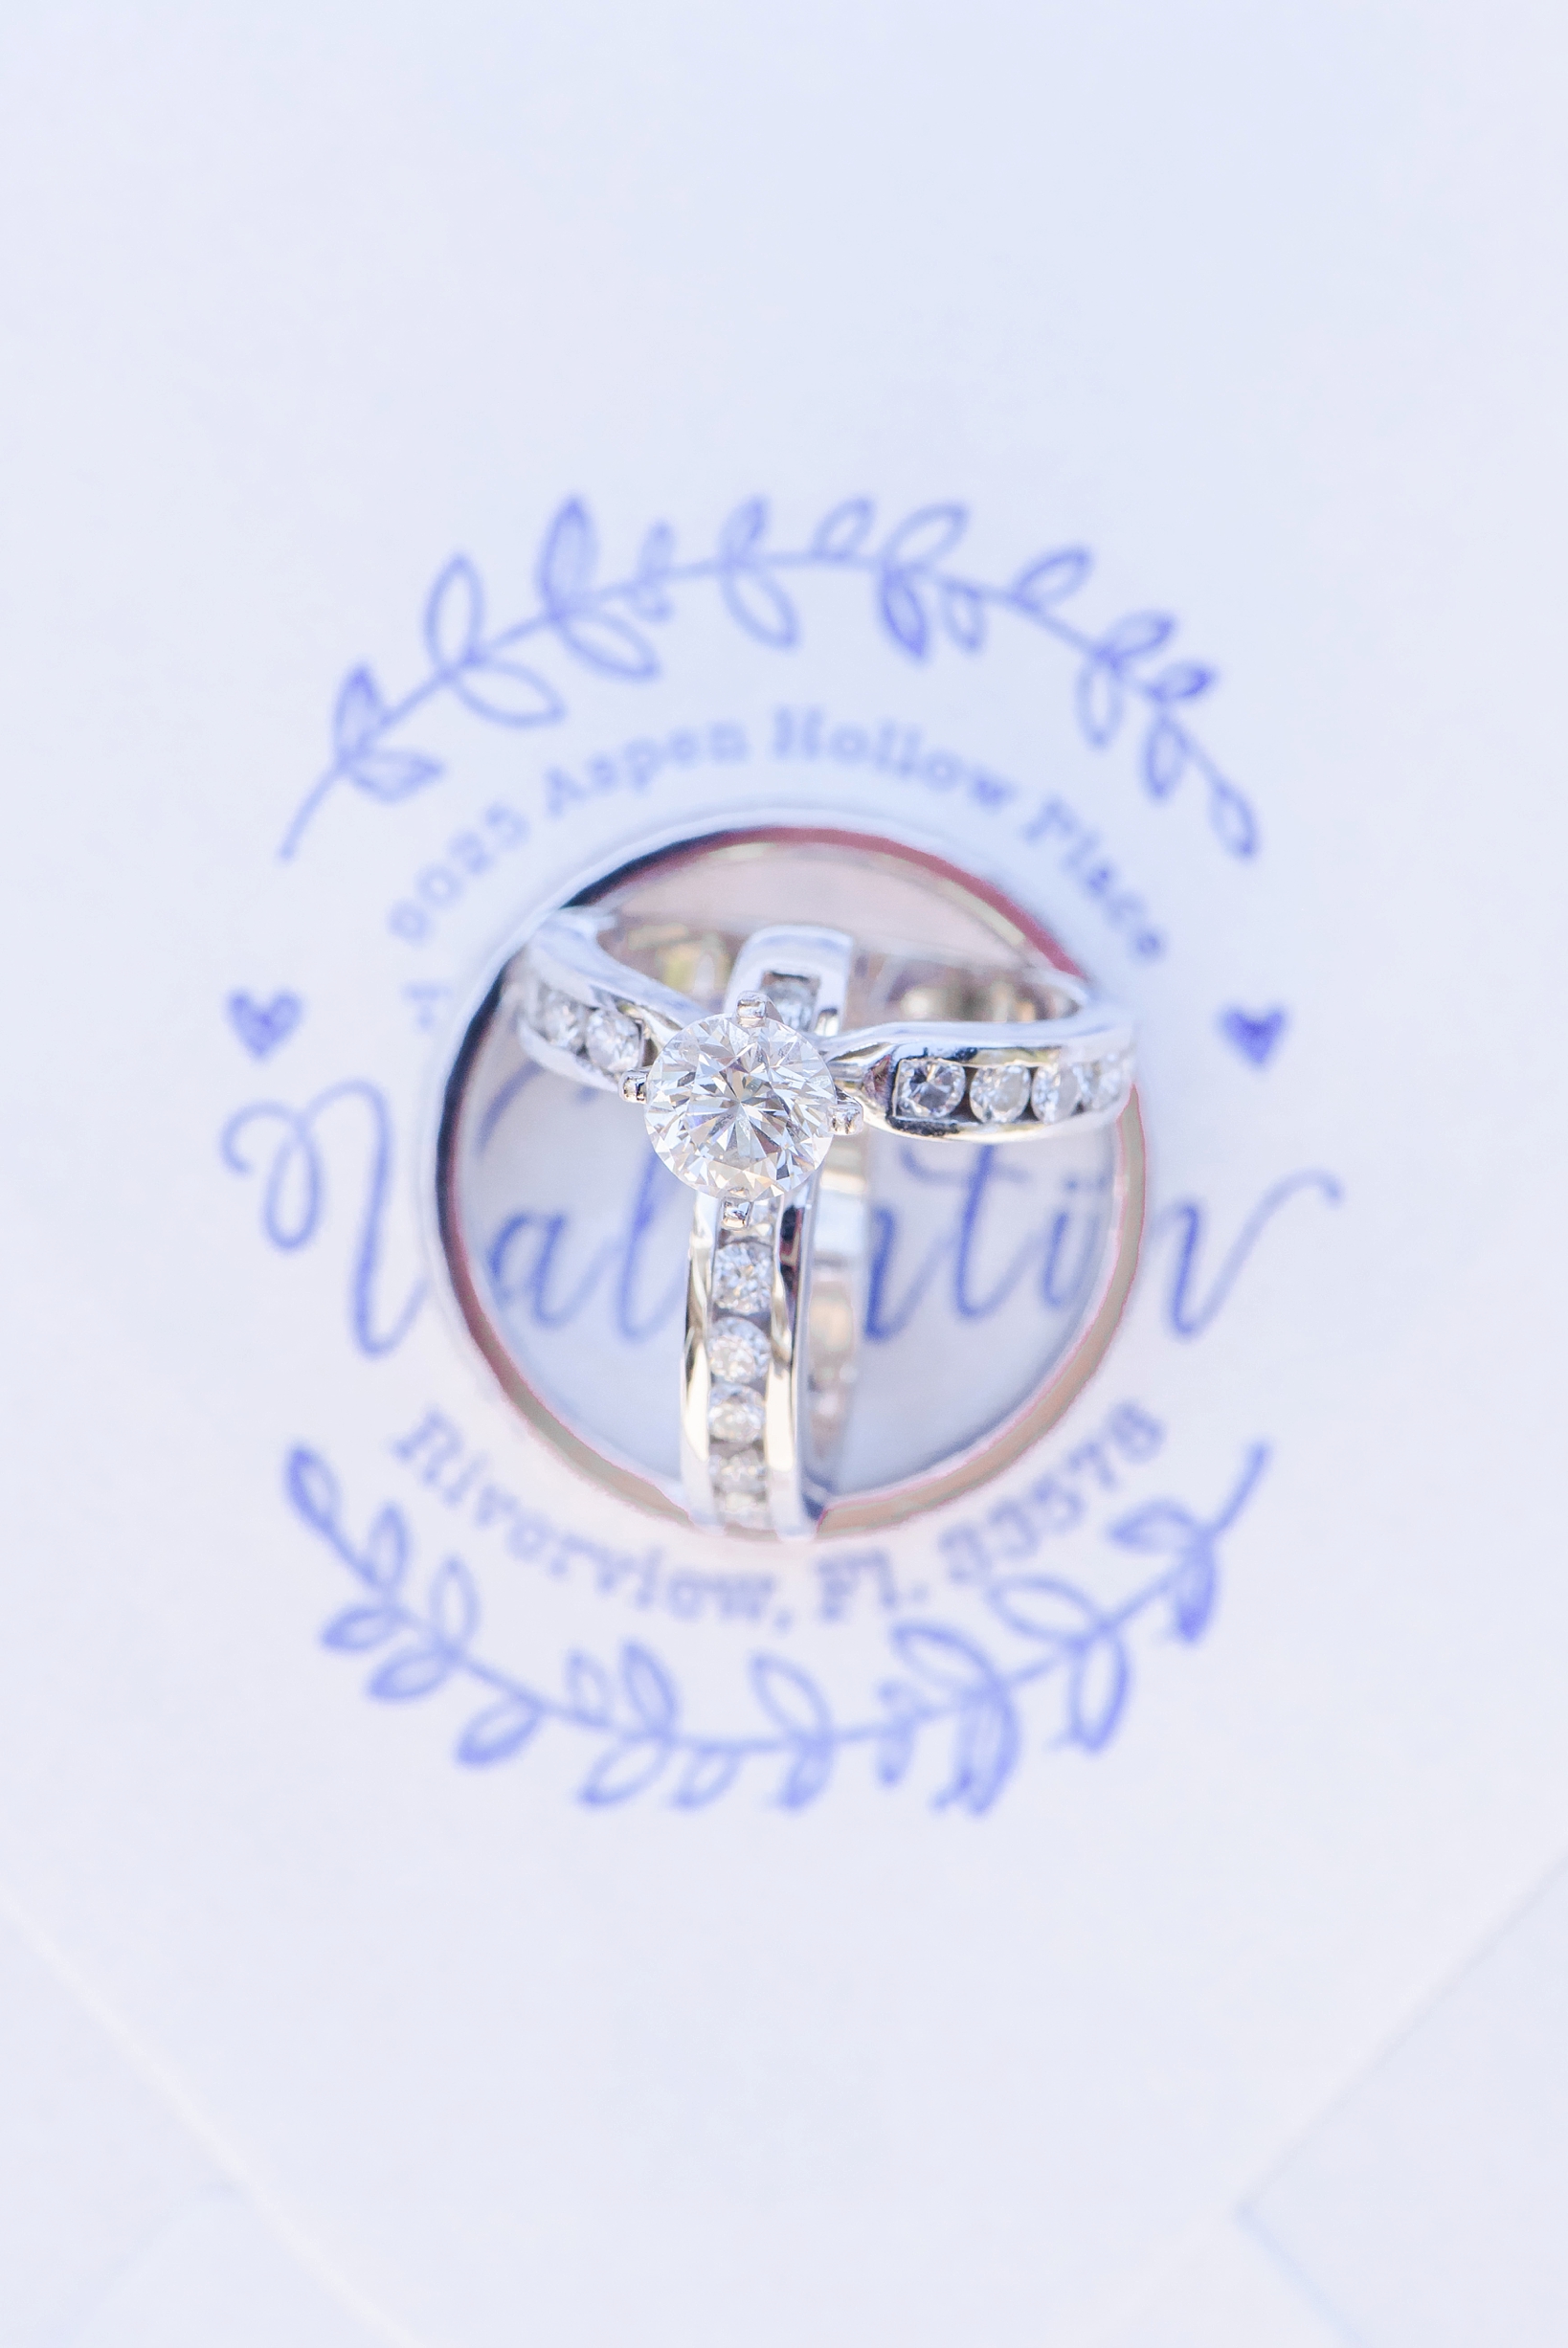 Wedding rings on top of a custom stamp of the new mr and mrs last name by Sarah & Ben